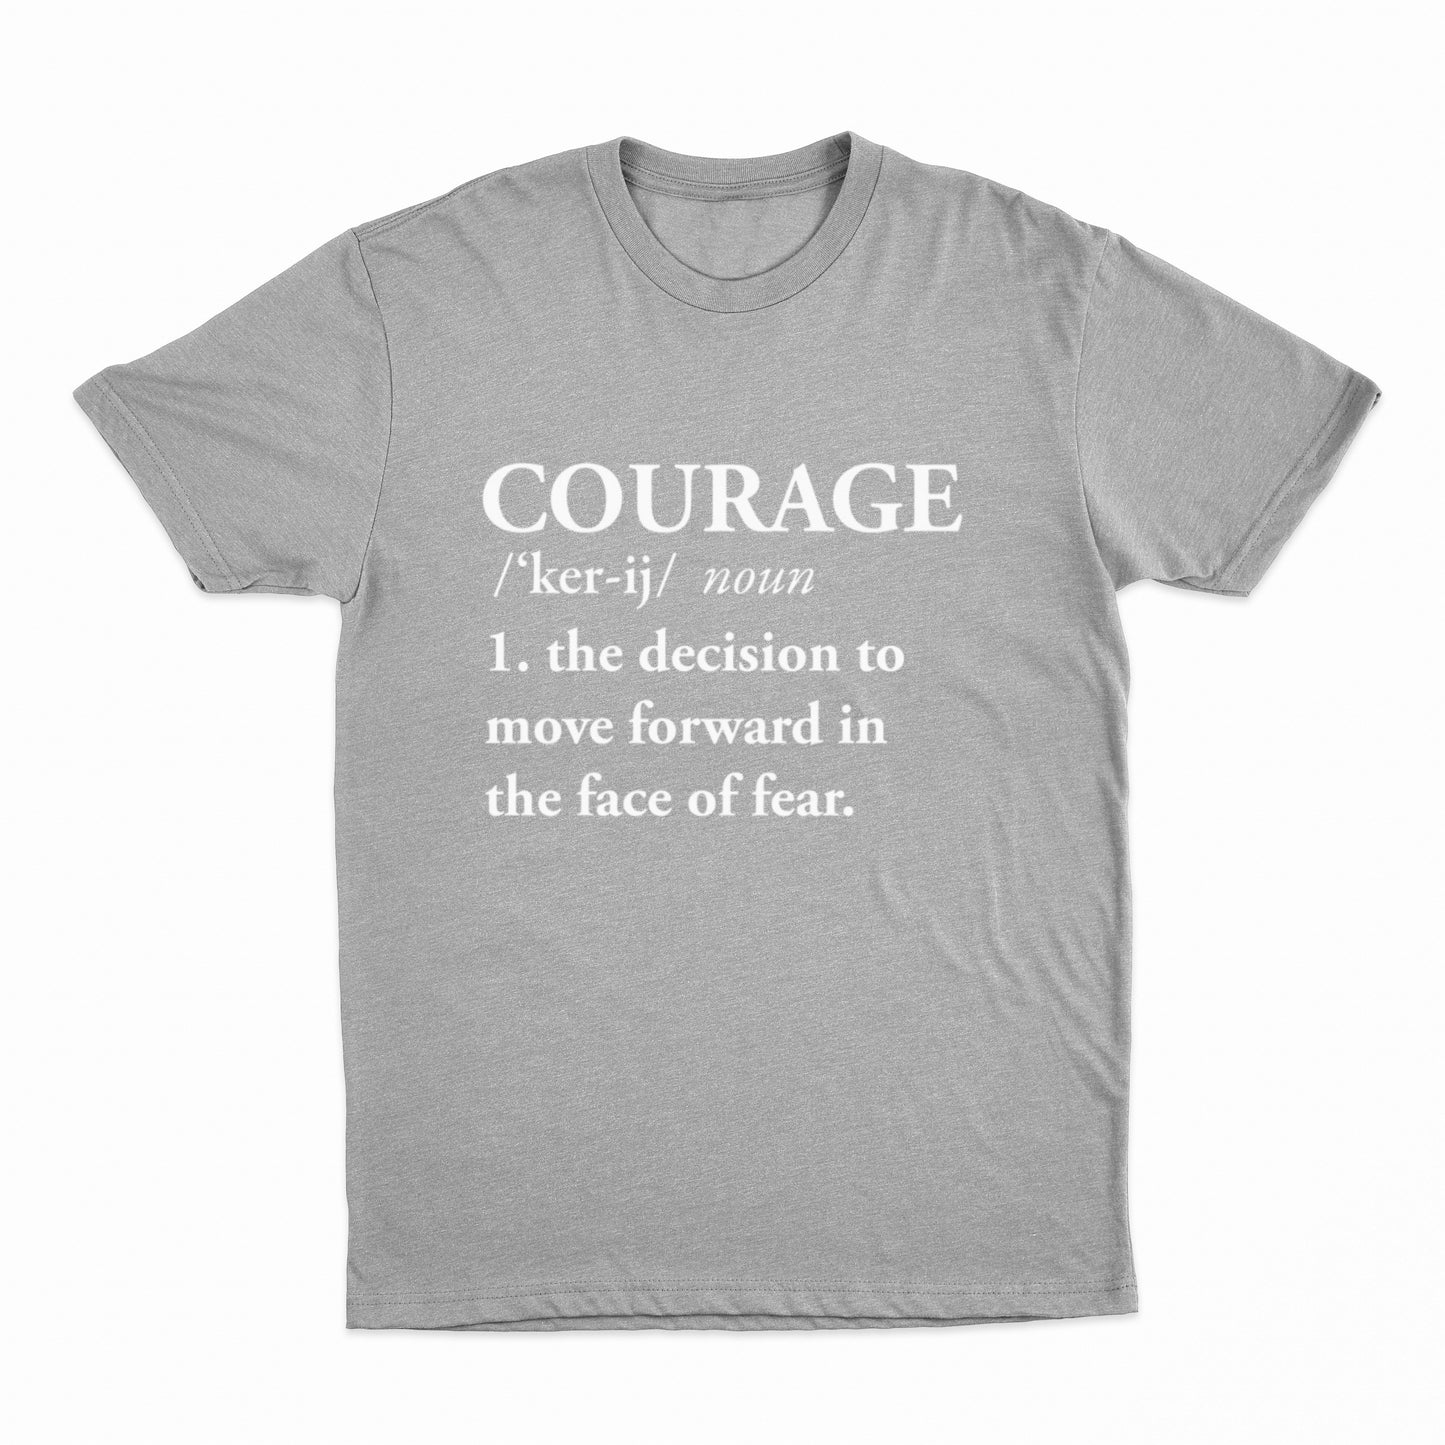 Heather Gray - Courage T-Shirt